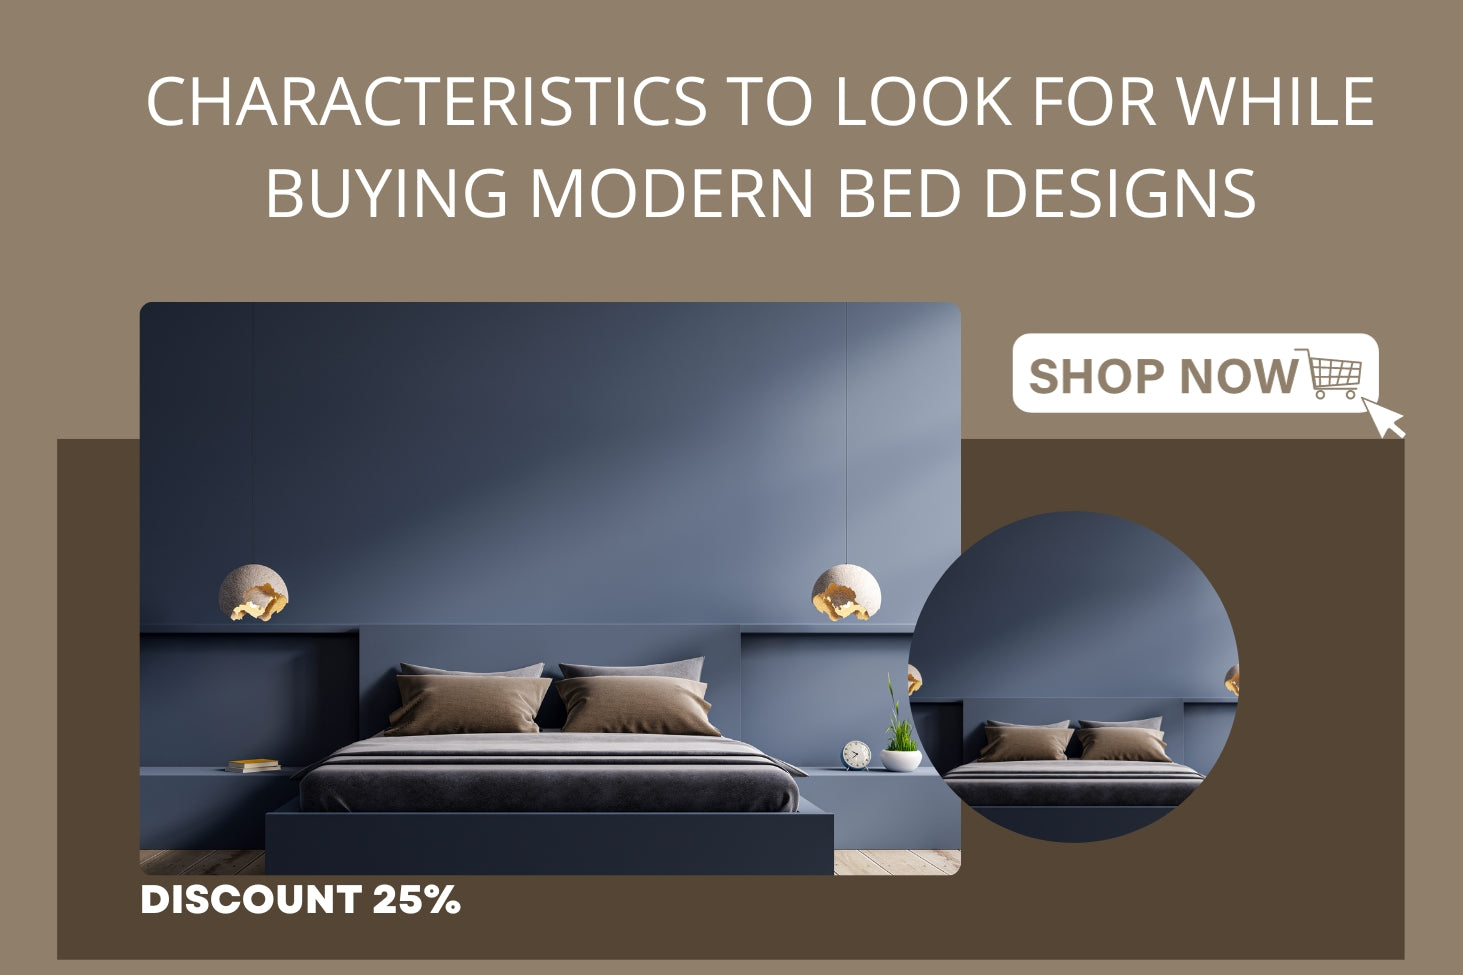 Characteristics to Look for While Buying Modern Bed Designs